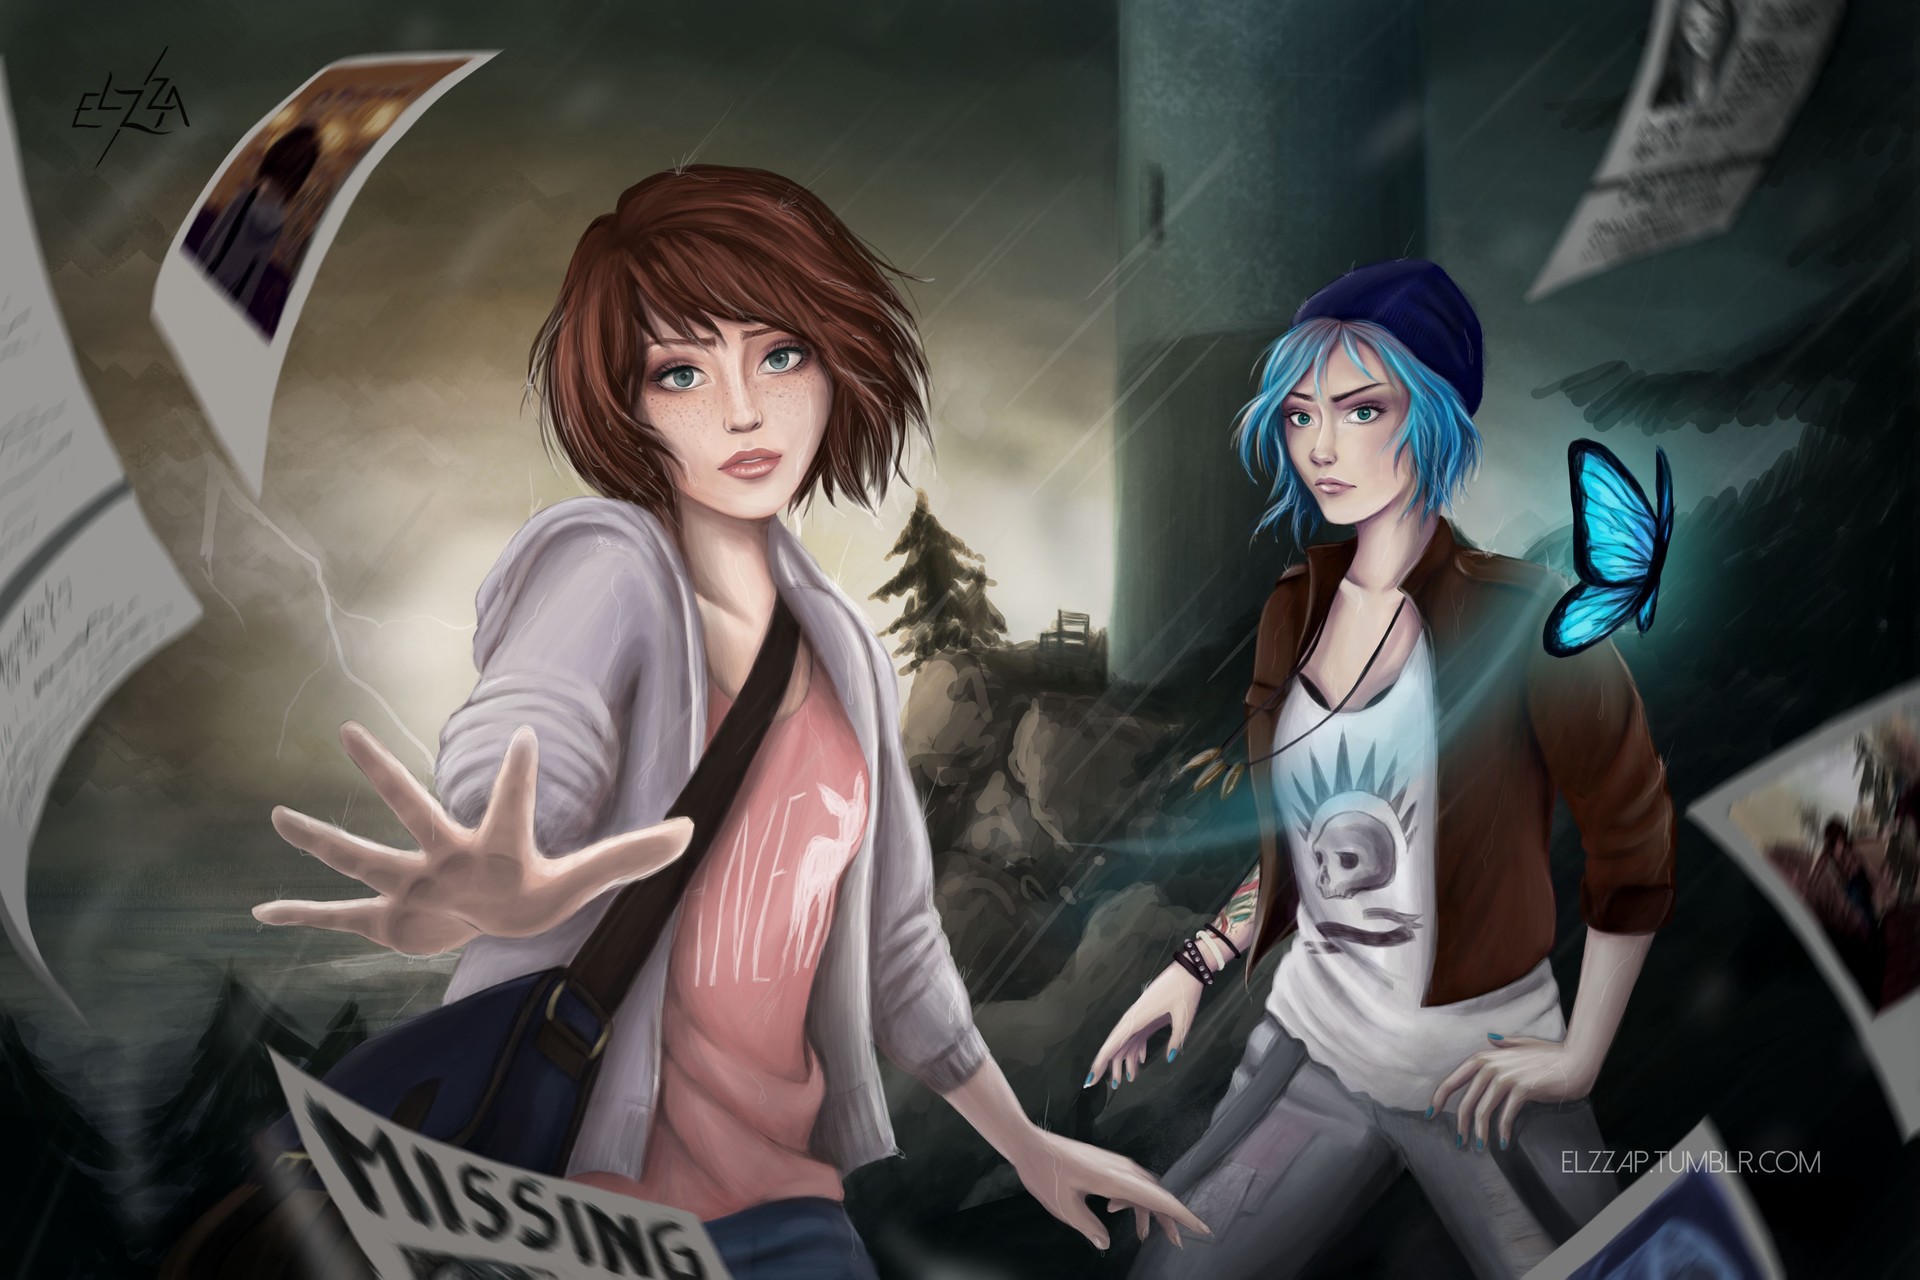 Fanart inspired by the video game Life is Strange by Square Enix.